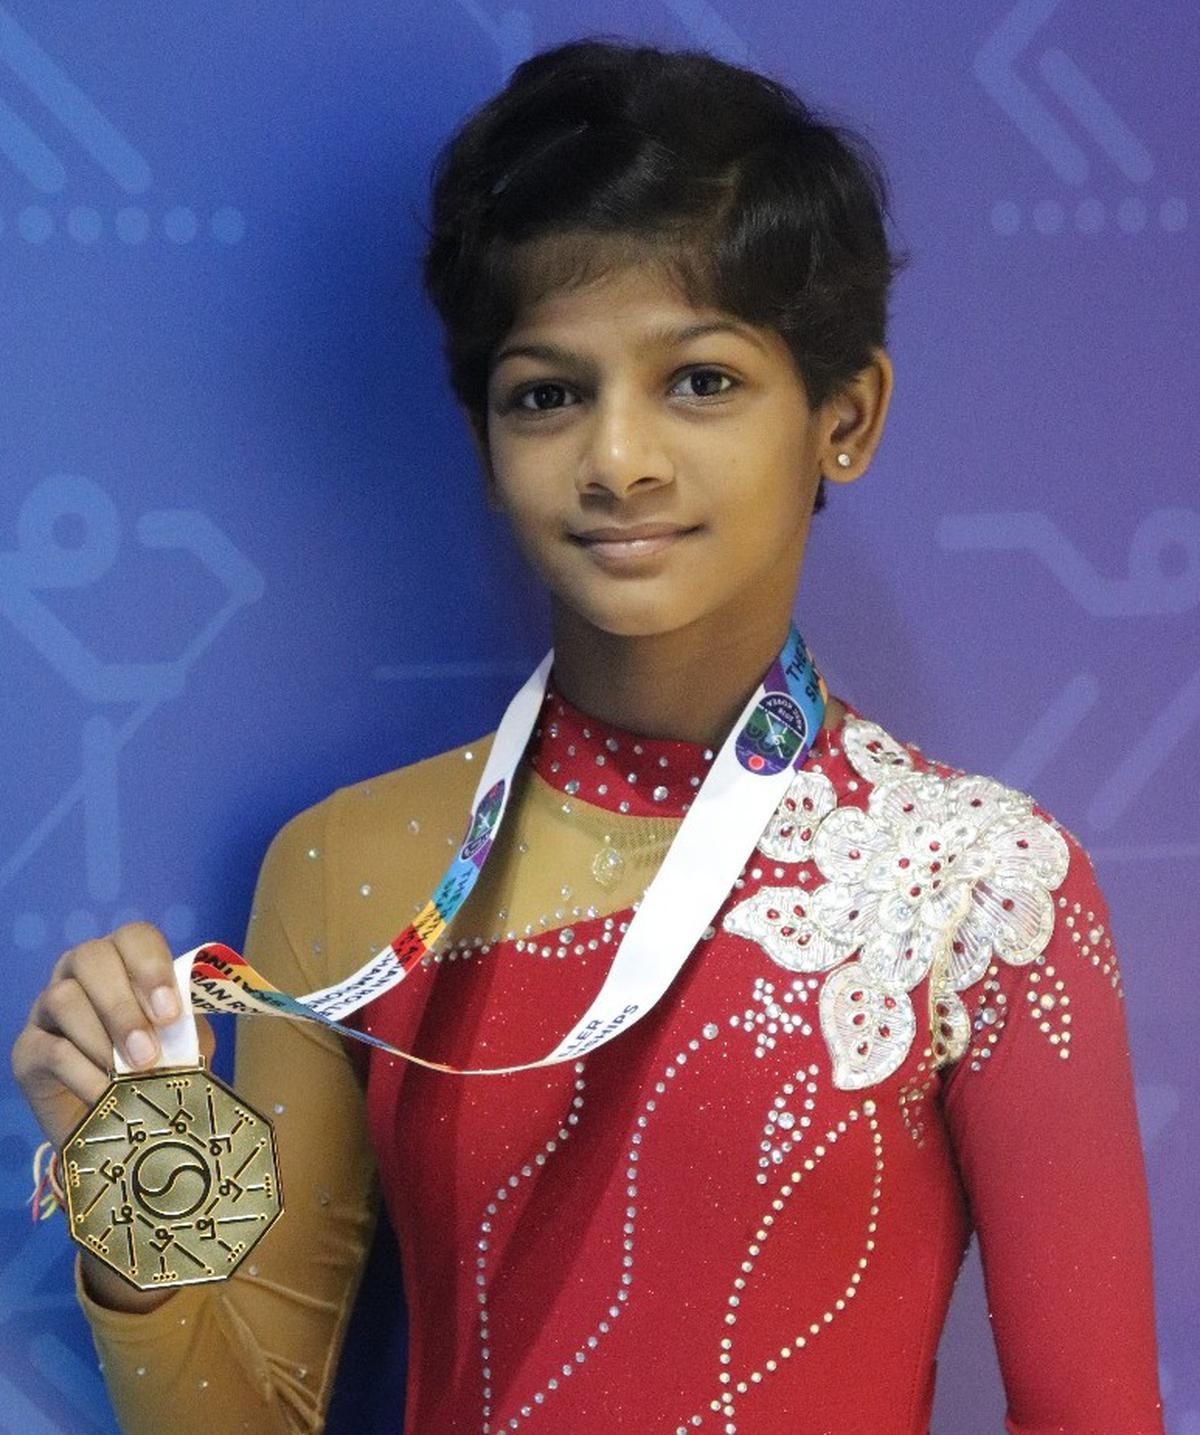 Visakhapatnam girl Akula Sai Samhitha who will be representing India at the Asian Games in the free style artistic skating event to be held in China